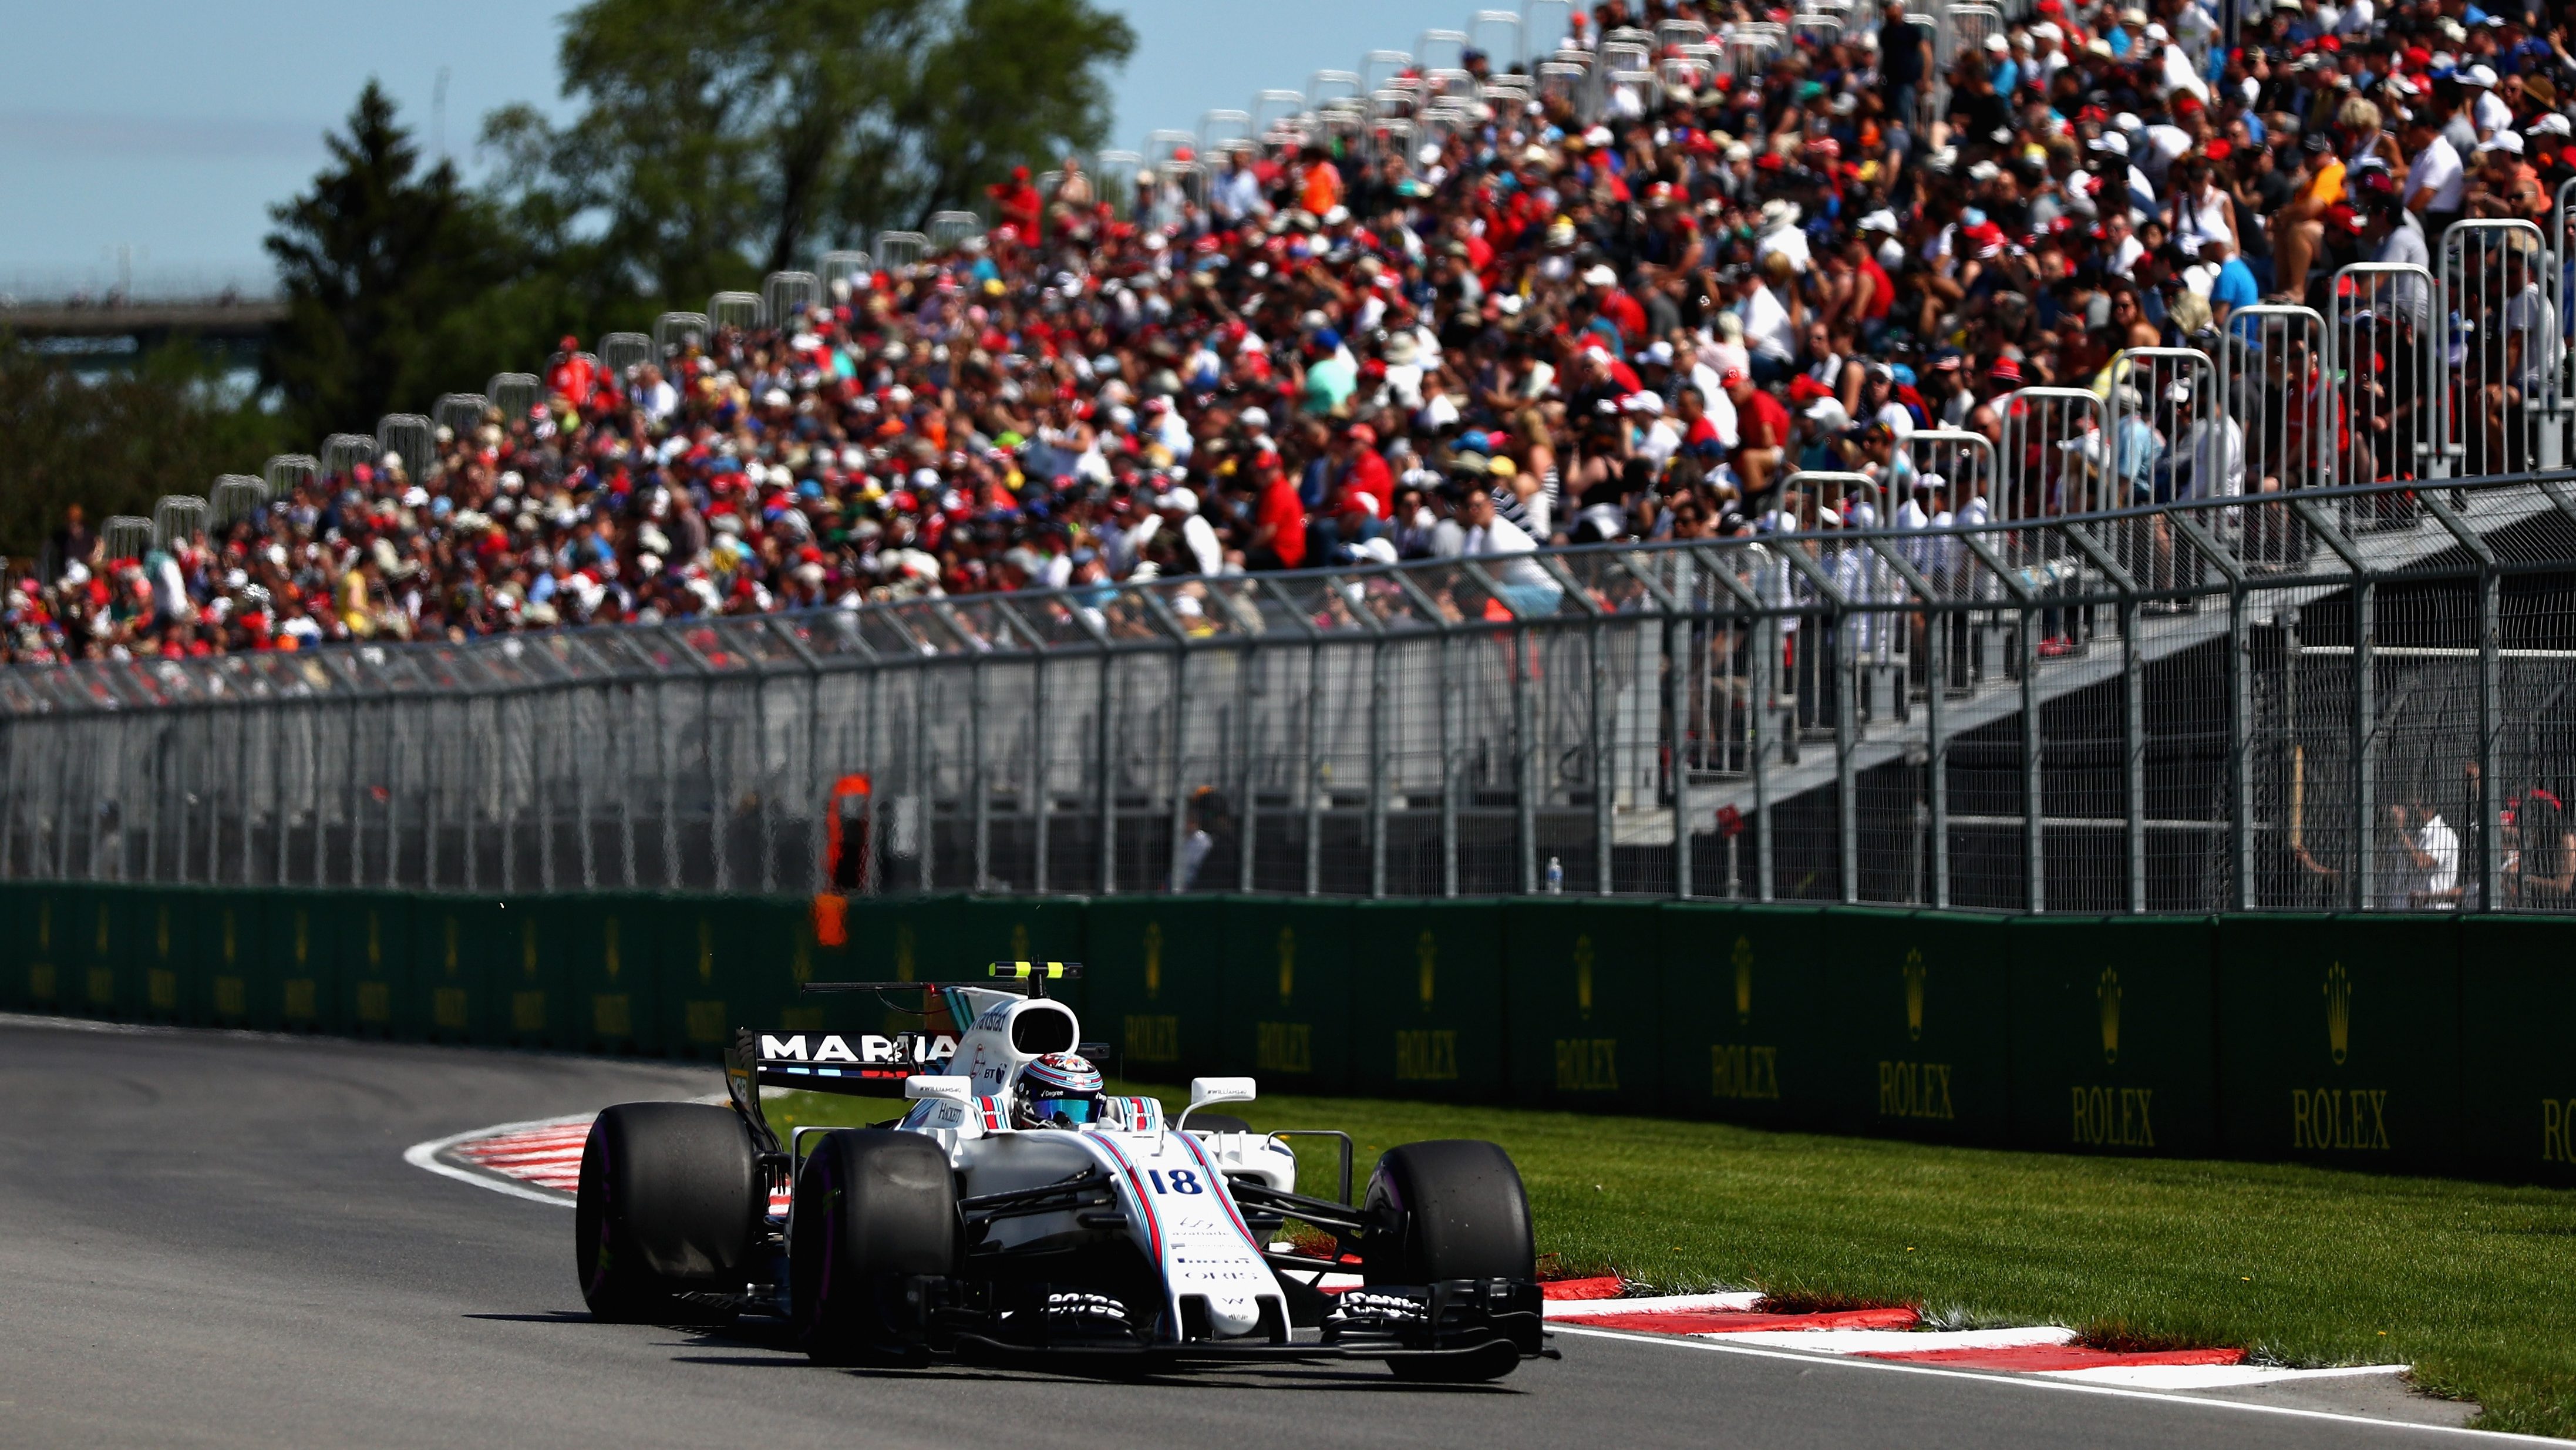 Canadian Grand Prix Qualifying Results & Starting Grid